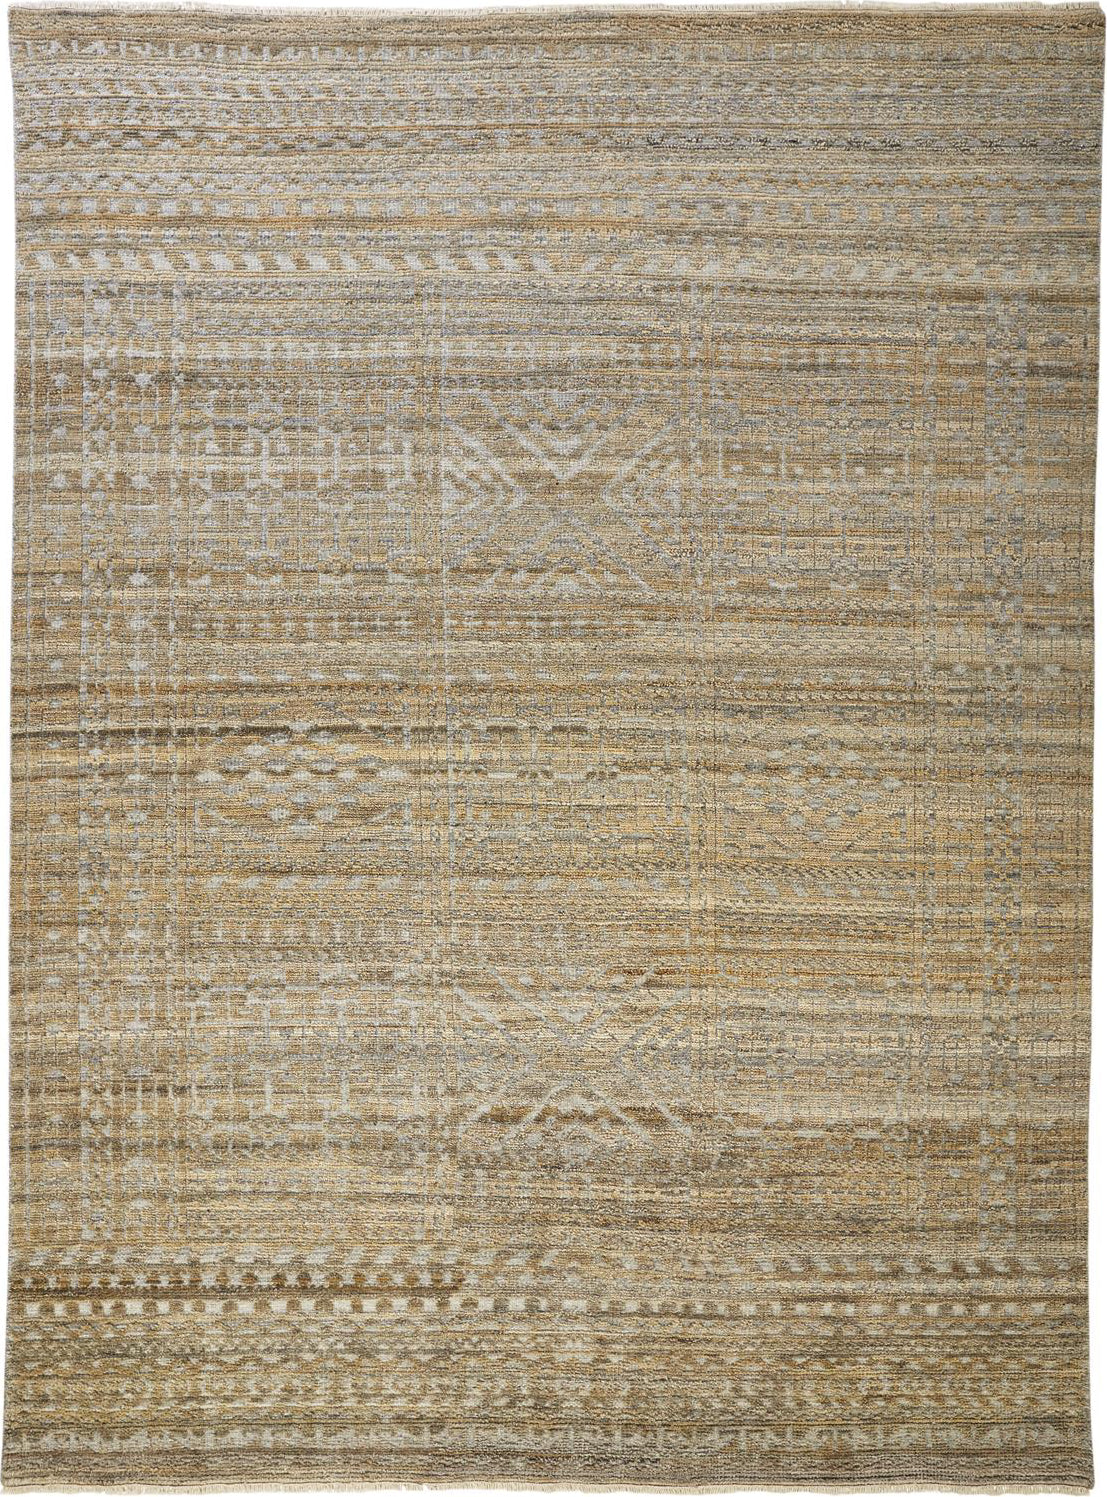 Feizy Payton 6496F Brown/Gray Area Rug main image